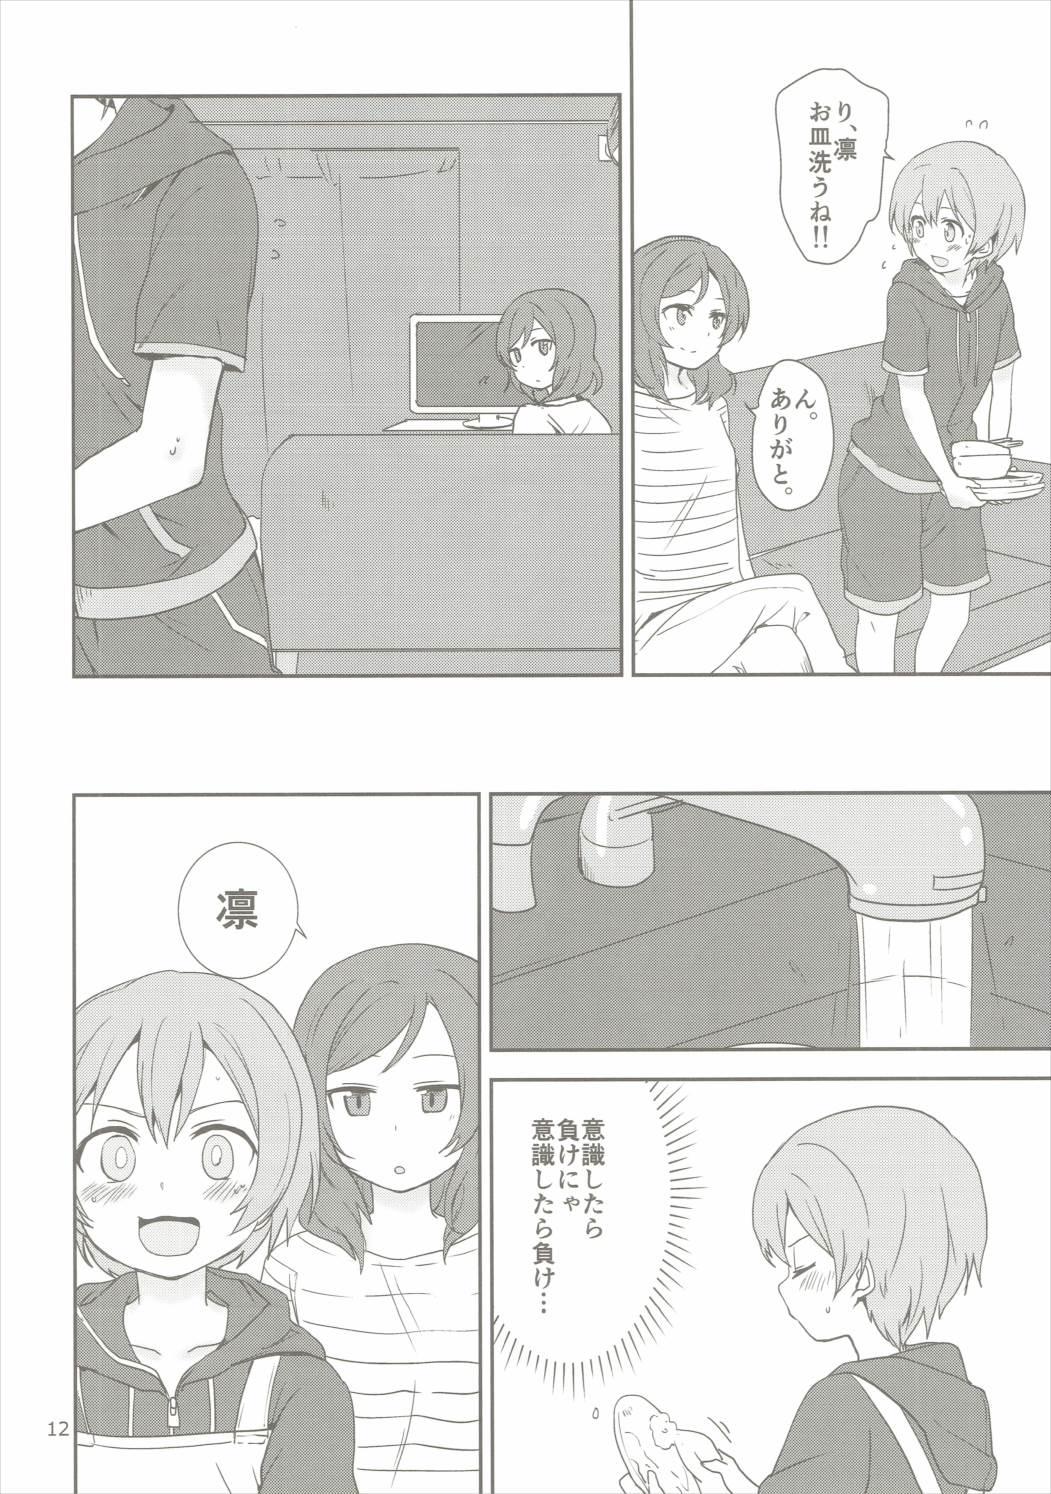 Adolescente Dokodemo Issho - Love live Punk - Page 11